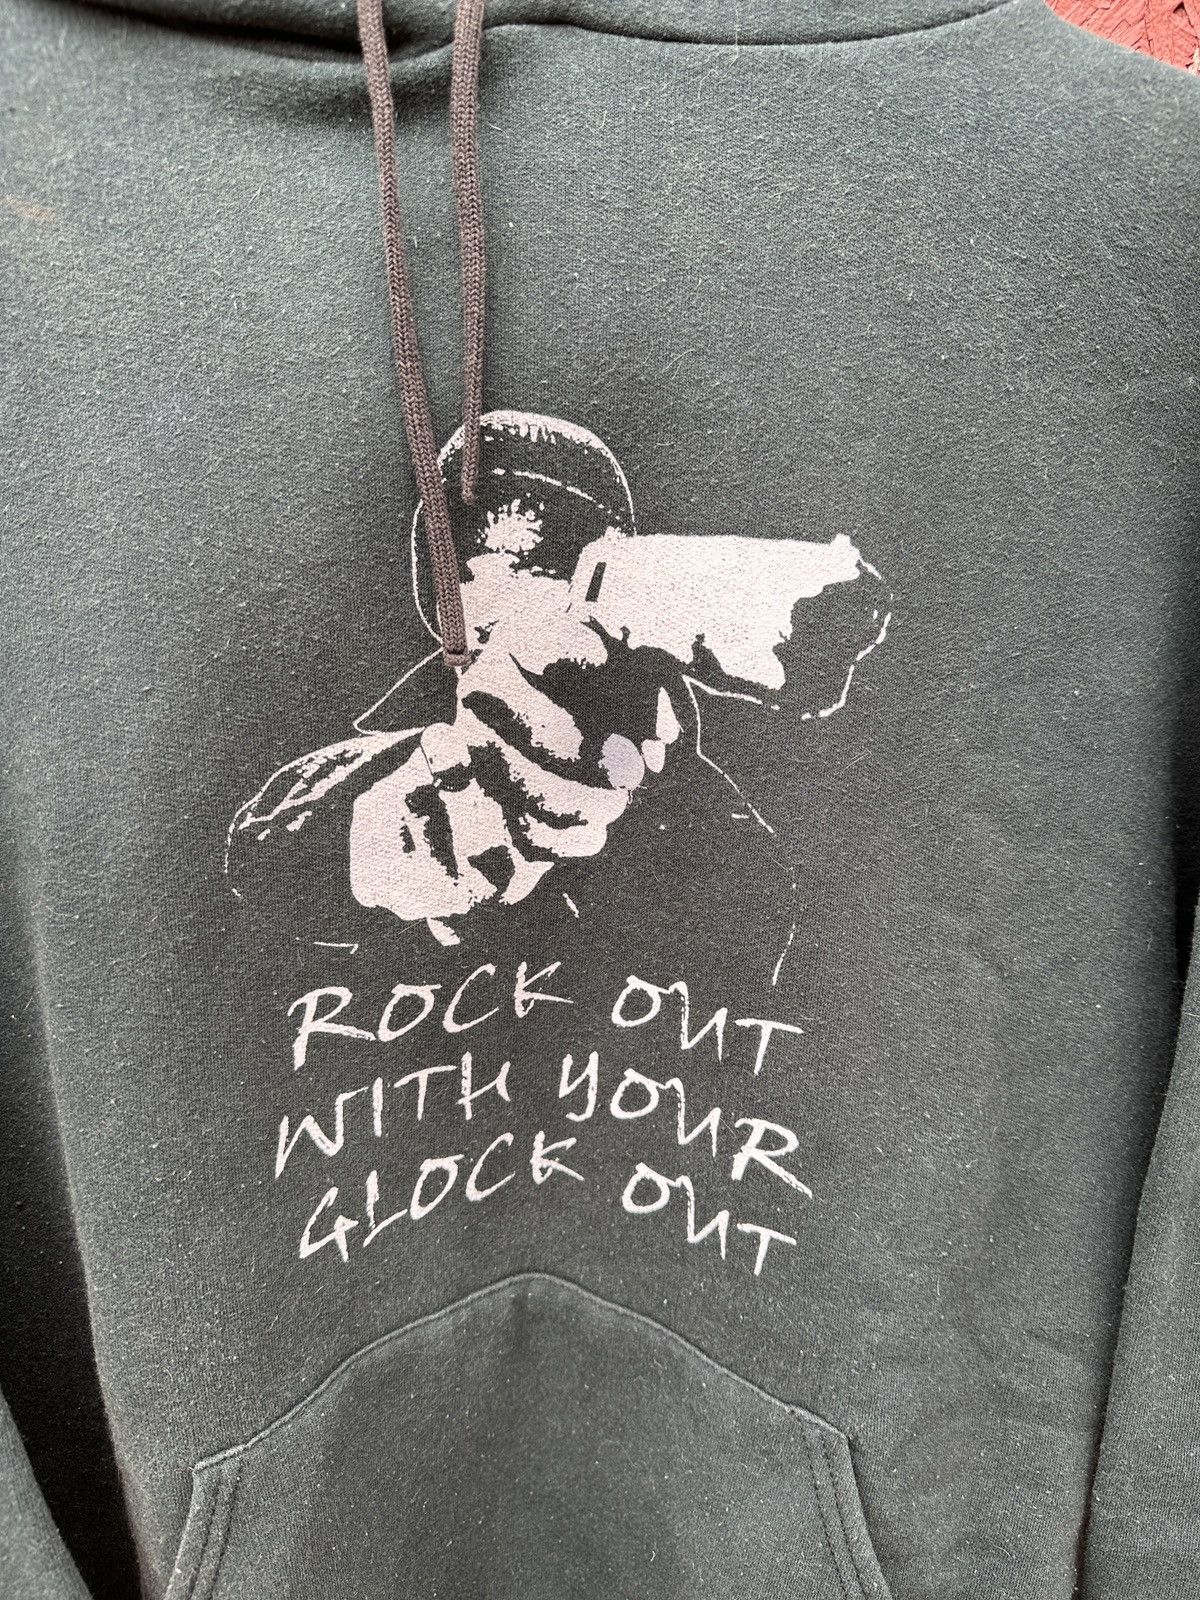 Vintage 2000s Rock Out with your Glock Out Hoodie Sweatshirt Size US L / EU 52-54 / 3 - 2 Preview